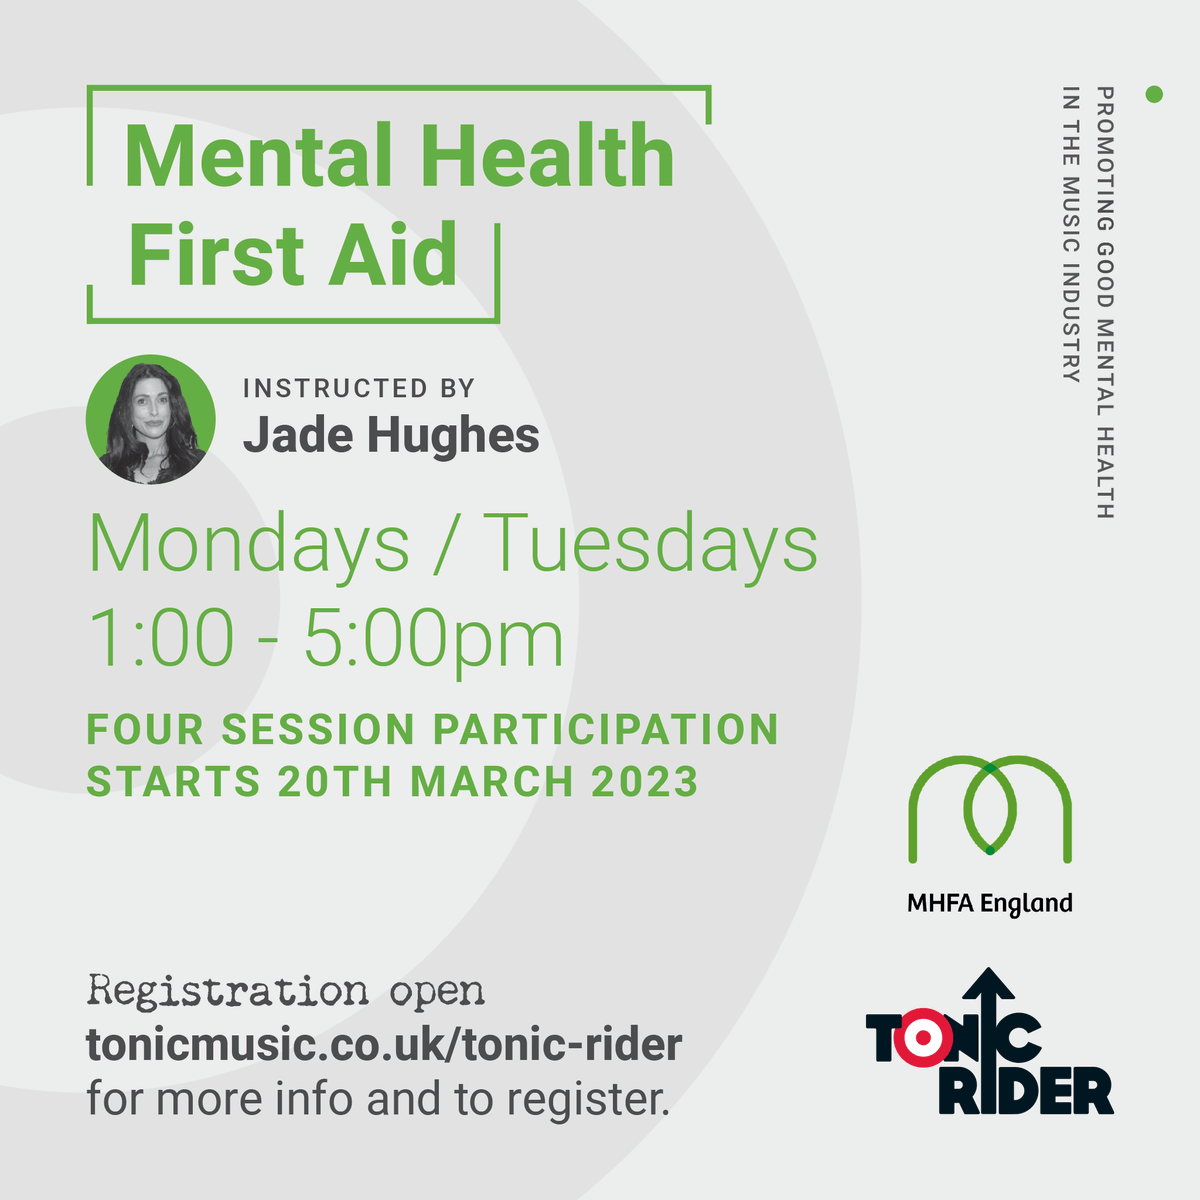 Limited spaces left!

Mental Health First Aid (online) course (accredited by @MHFAEngland)

FREE to the UK music industry - singers, musicians, DJs, producers, technicians, crew, managers, venue personnel...

#TonicRider #FirstAid #MentalHealth #Wellbeing #MusicIndustry